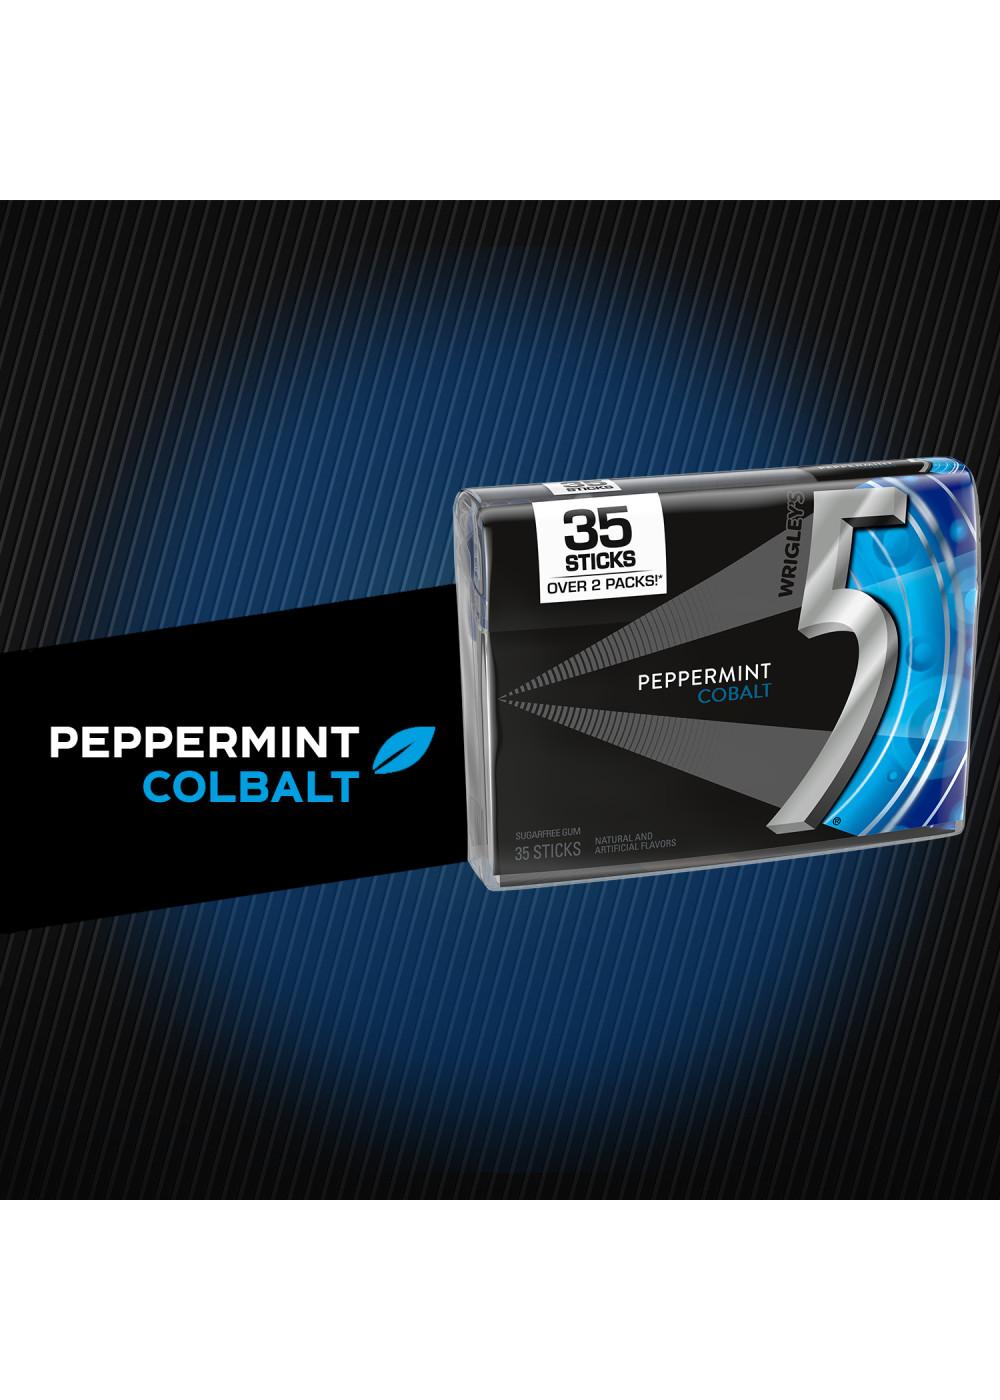 Wrigley's 5 Peppermint Cobalt Sugar Free Chewing Gum; image 4 of 7